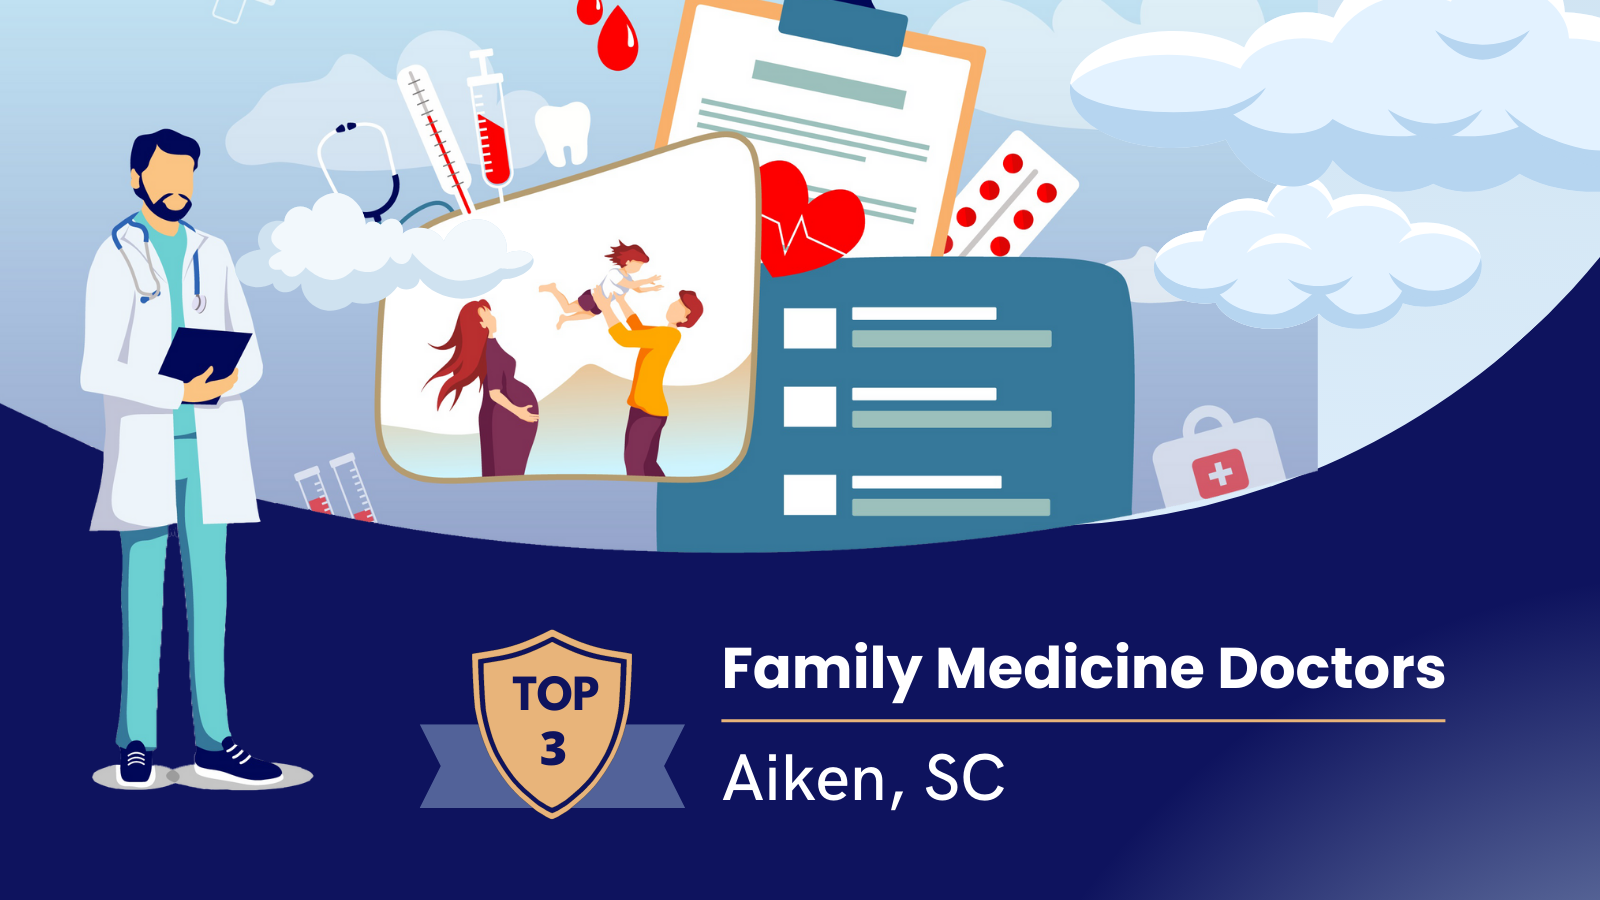 Three Top Rated Family Medicine Doctors in Aiken County, South Carolina